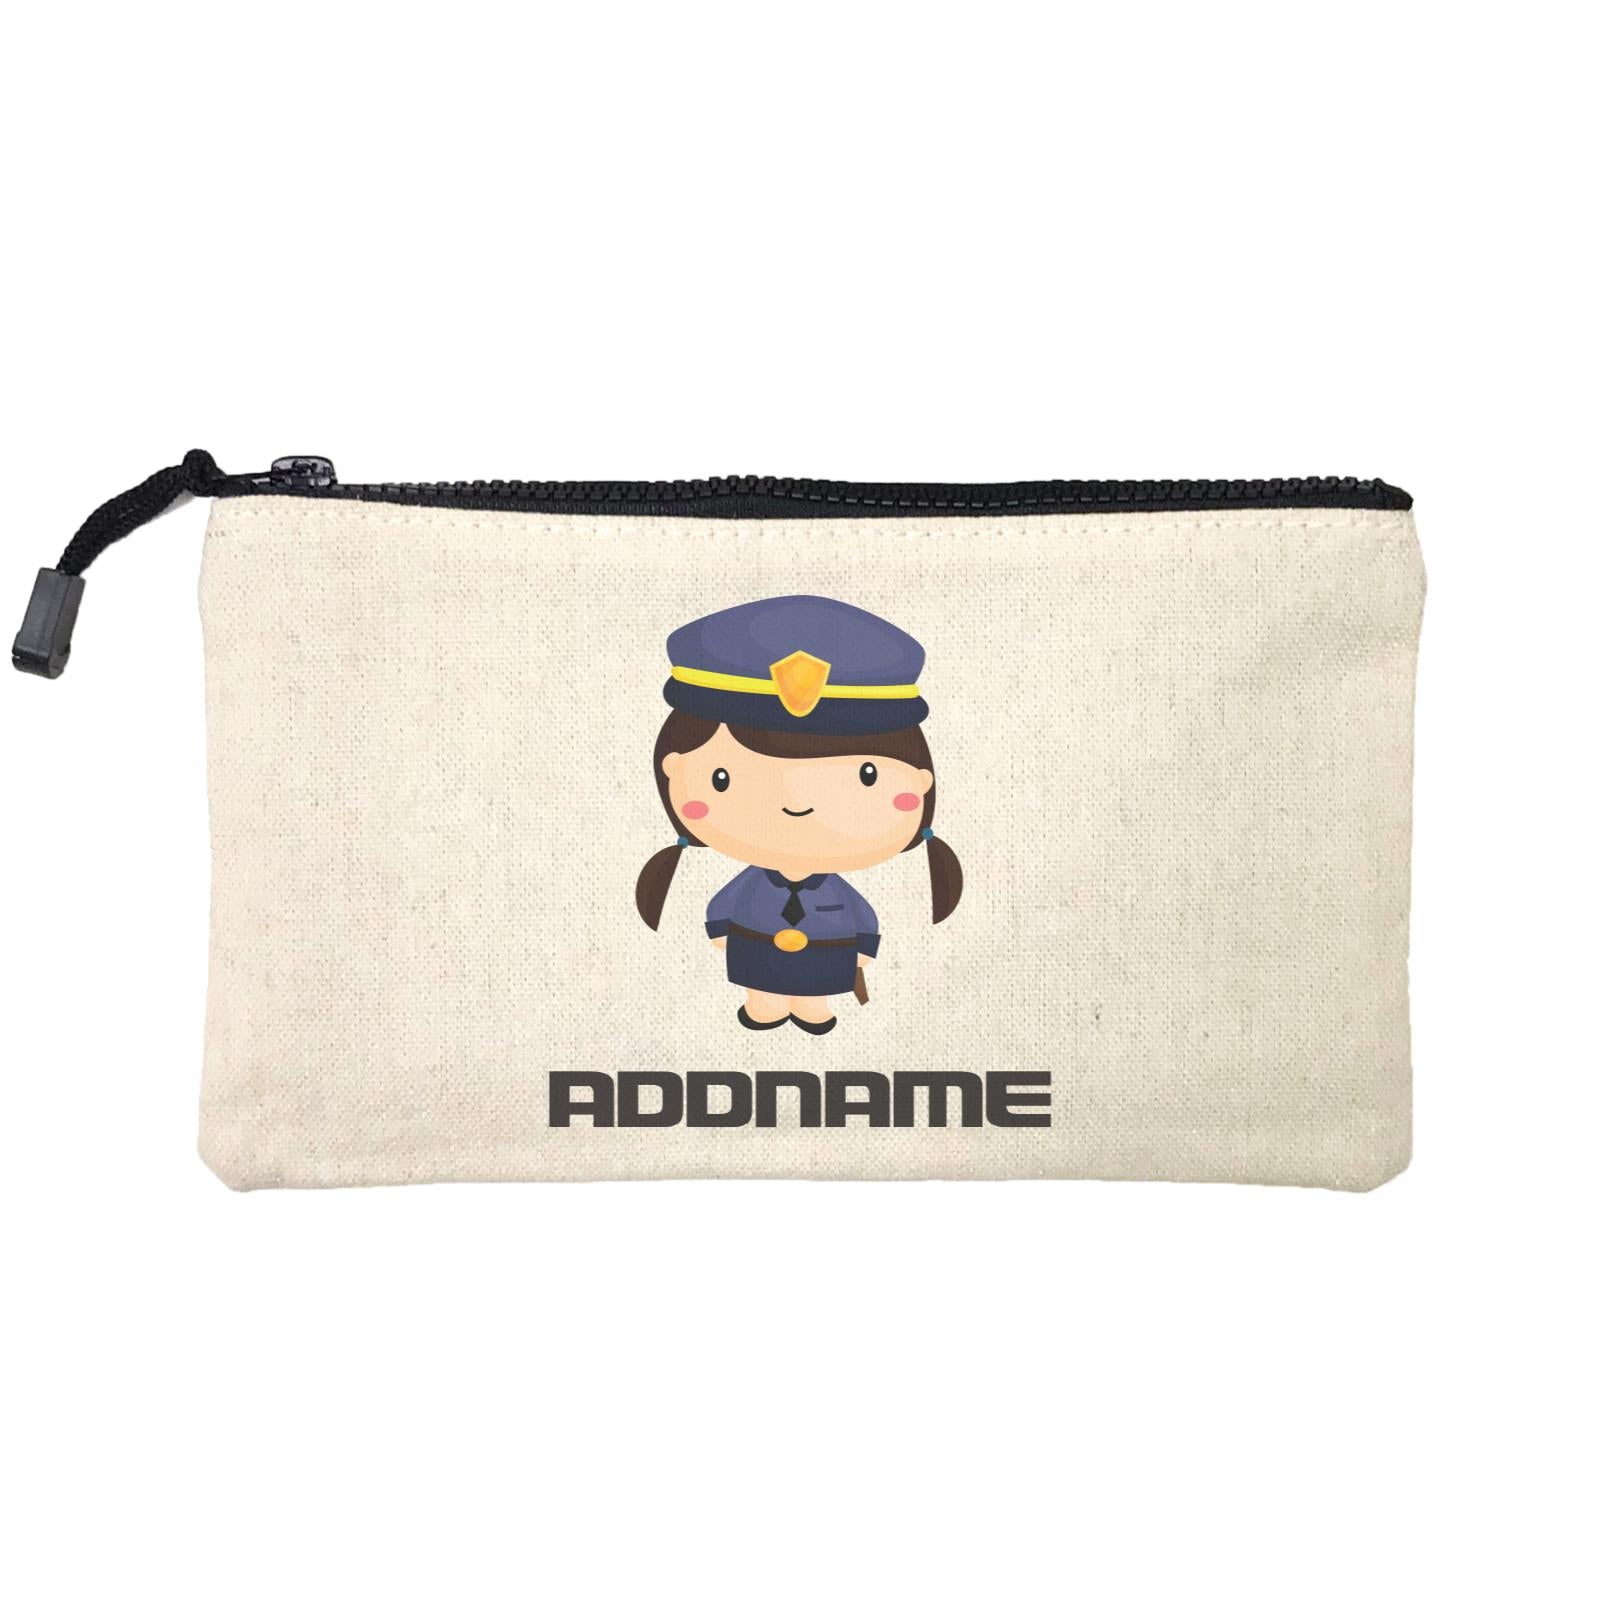 Birthday Police Officer Long Twin Pony Tails Girl In Suit Addname Mini Accessories Stationery Pouch